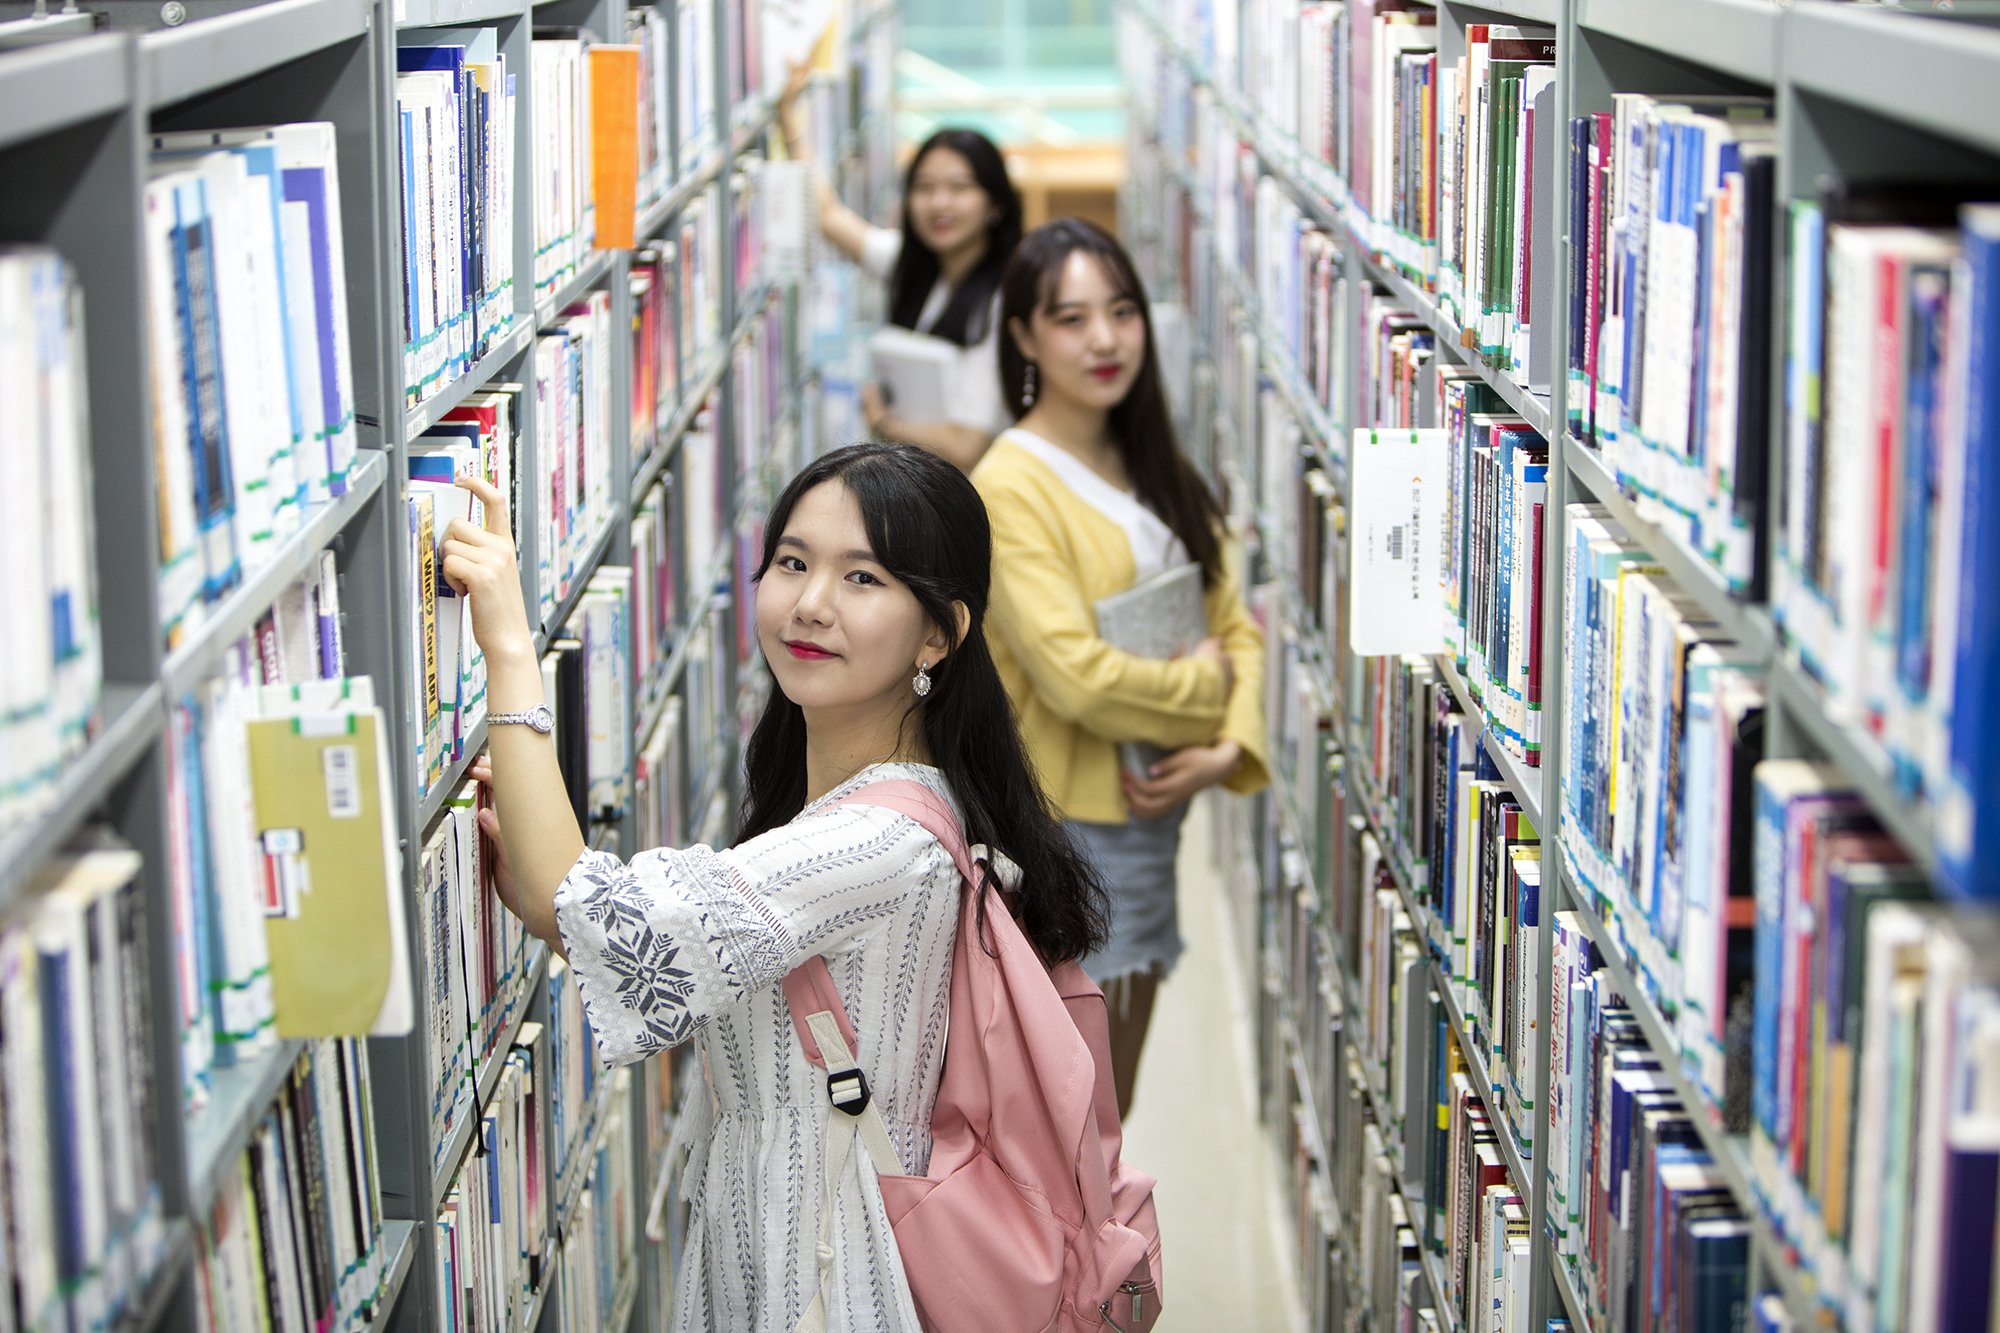 Library 이미지 사진